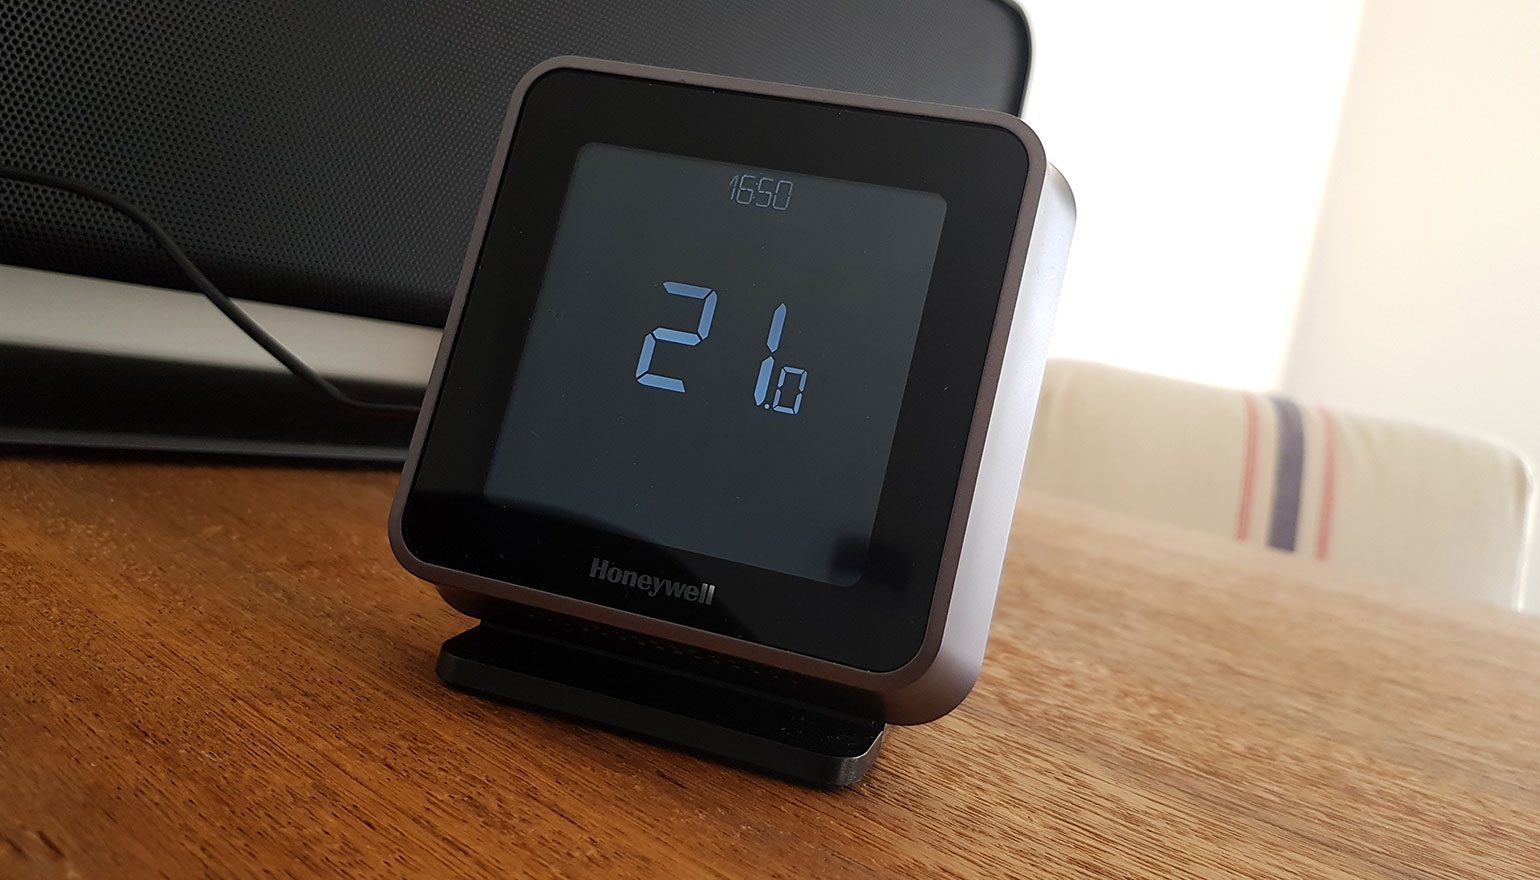 Review: Honeywell Lyric T6R draadloze thermostaat - slim, simpel systeem |